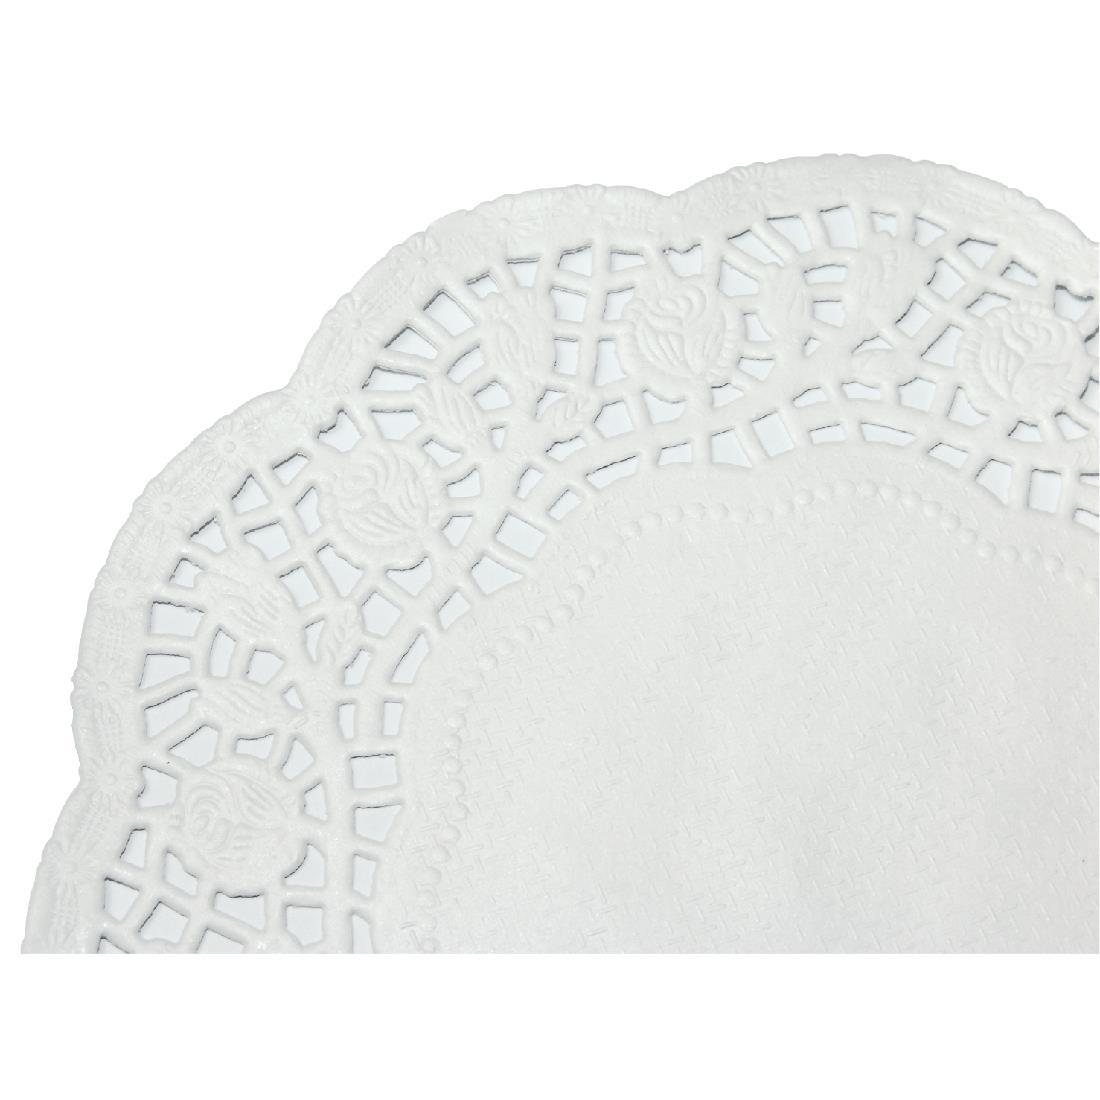 Fiesta Round Paper Doilies 100mm (Pack of 250) - CE990  - 3